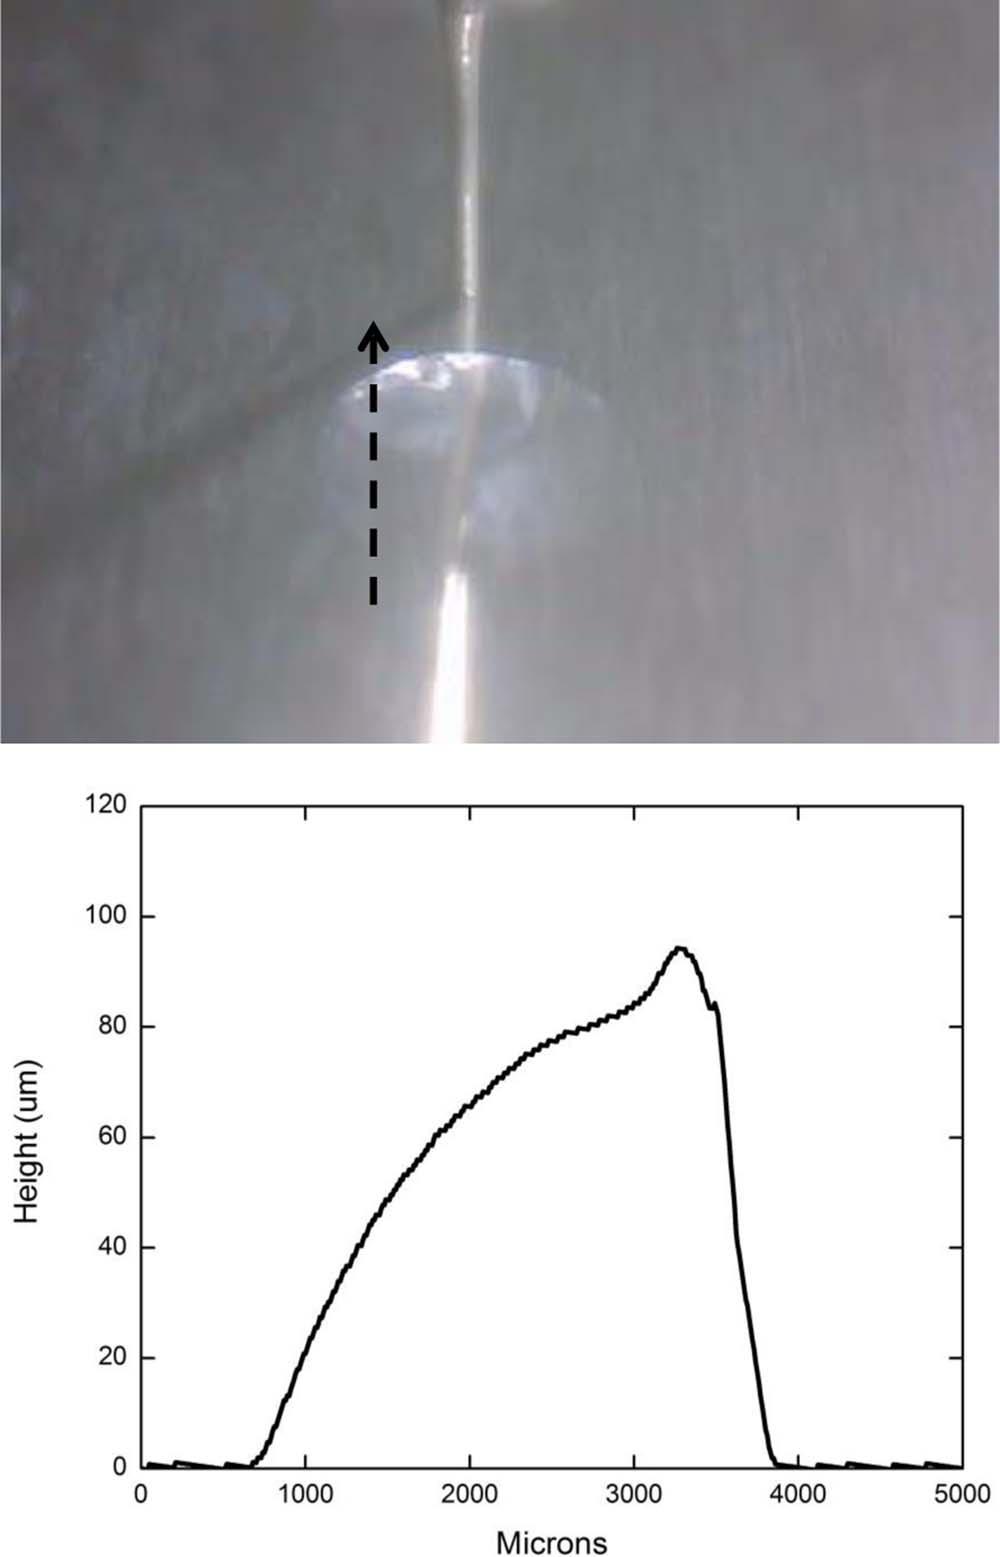 C657 Figure 5. Droplet height profiles obtained by line scans for 0.1 M droplets of MgCl 2 at initial volumes of 3, 6 and 9 μl.